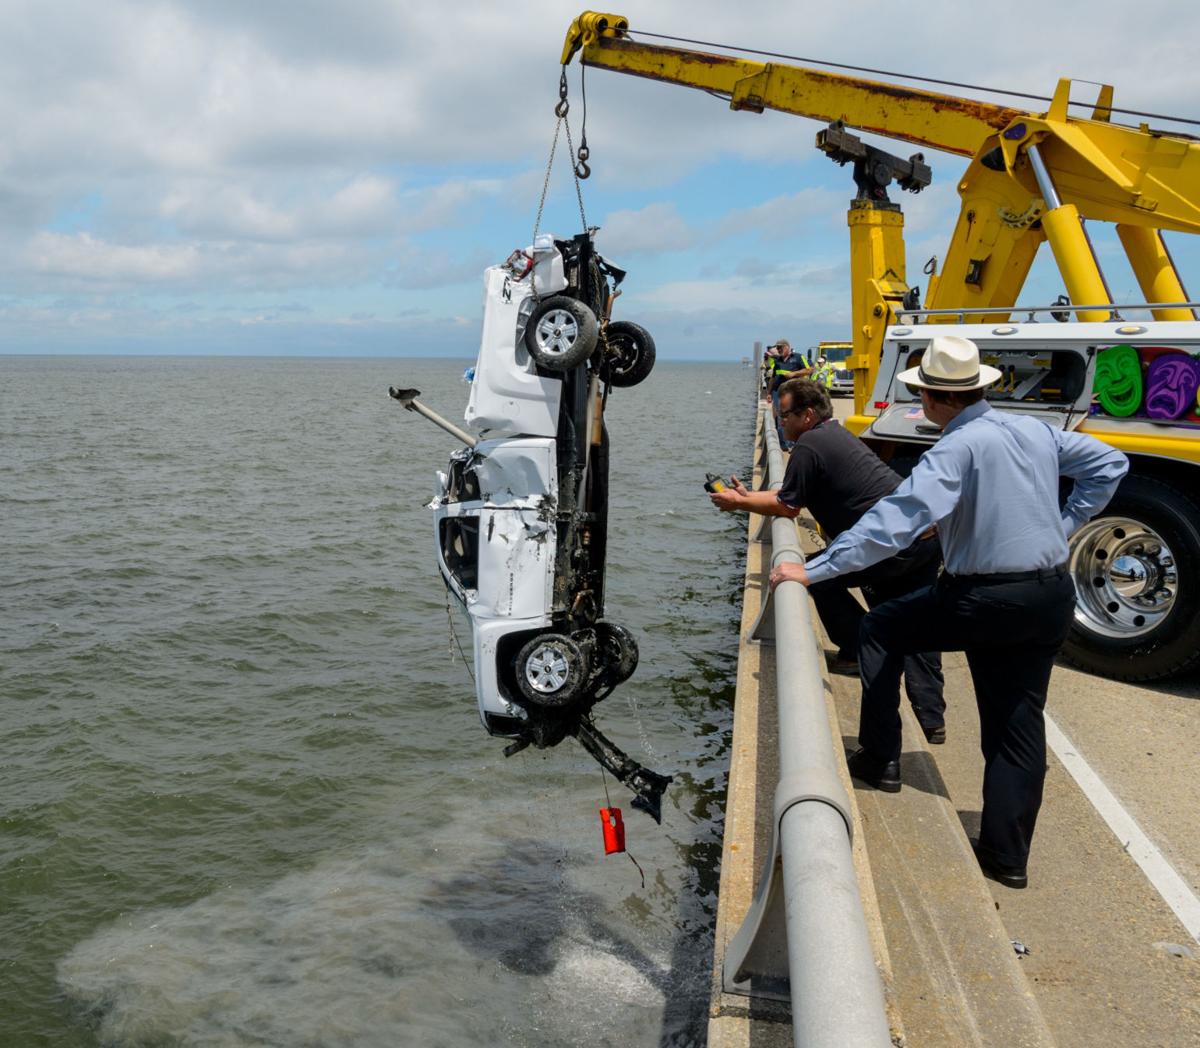 Causeway driver rescued after vehicle plunges into lake ...